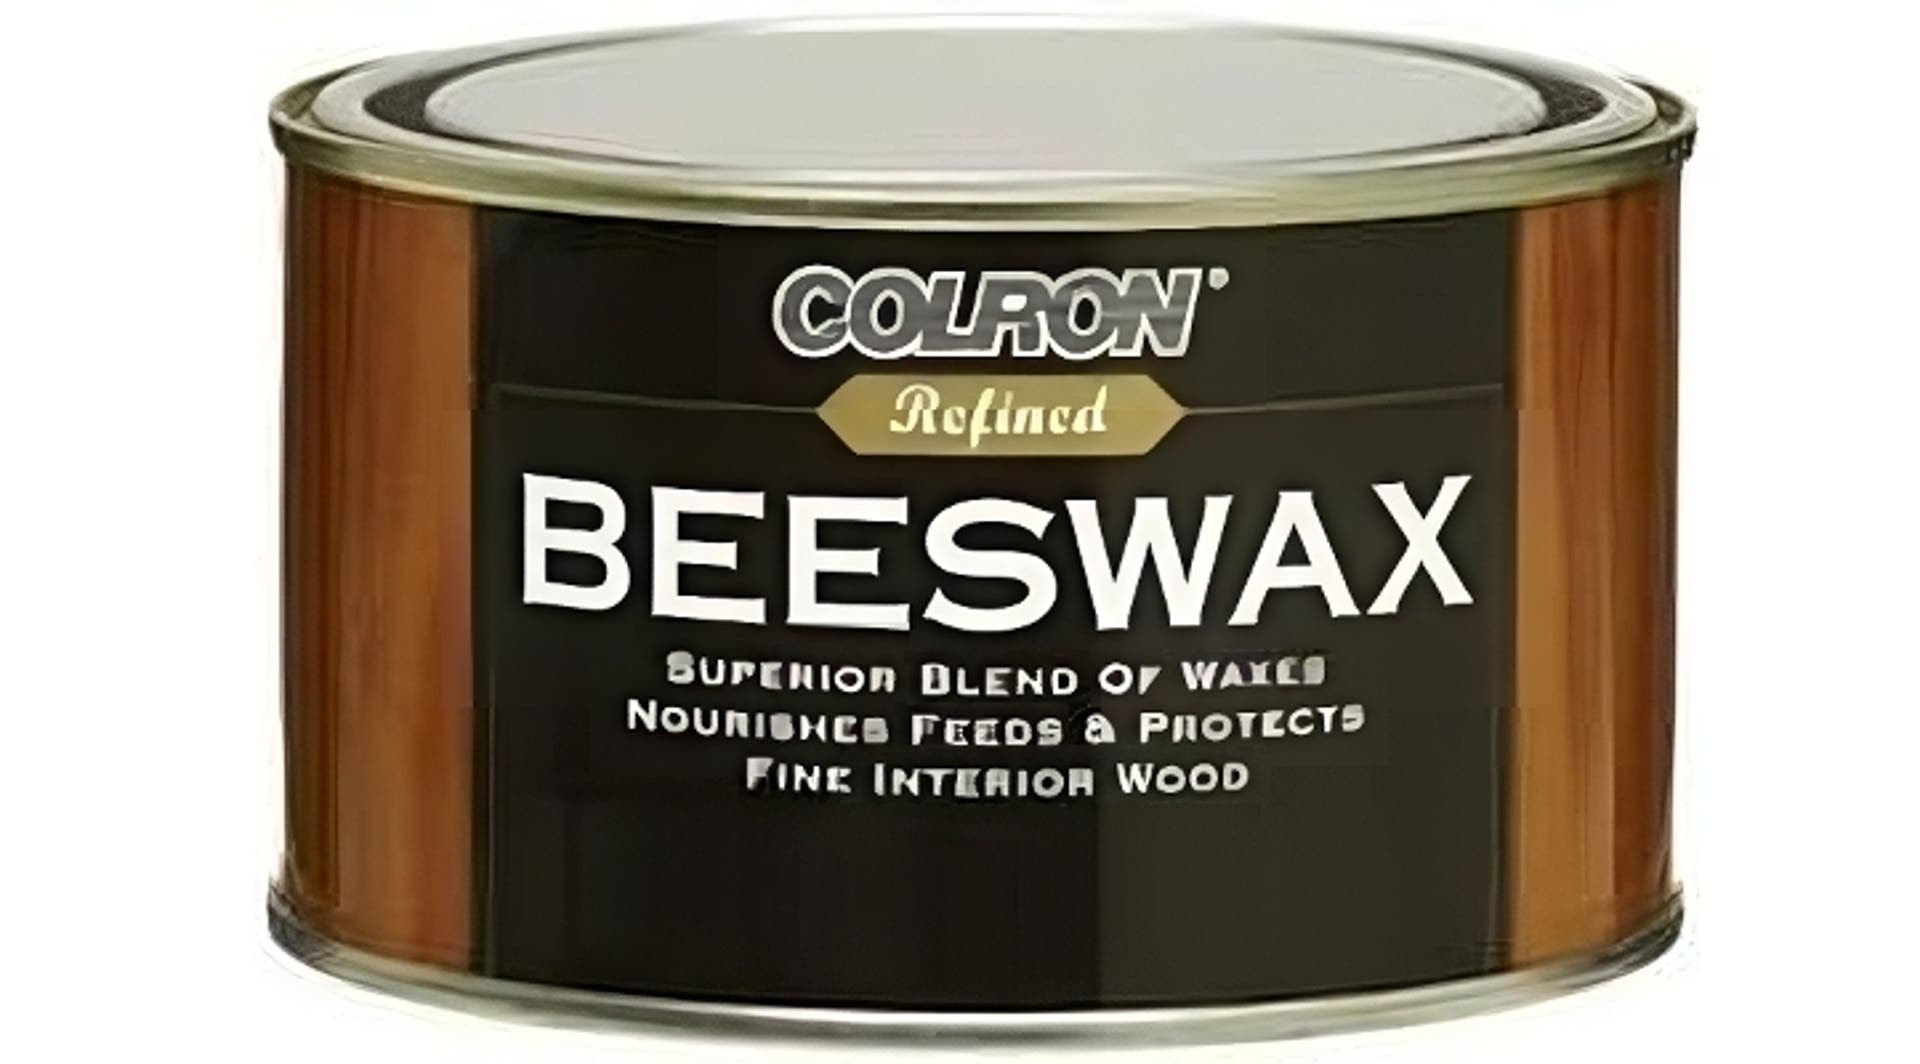  Colron Beeswax at Wood Finishes Direct 